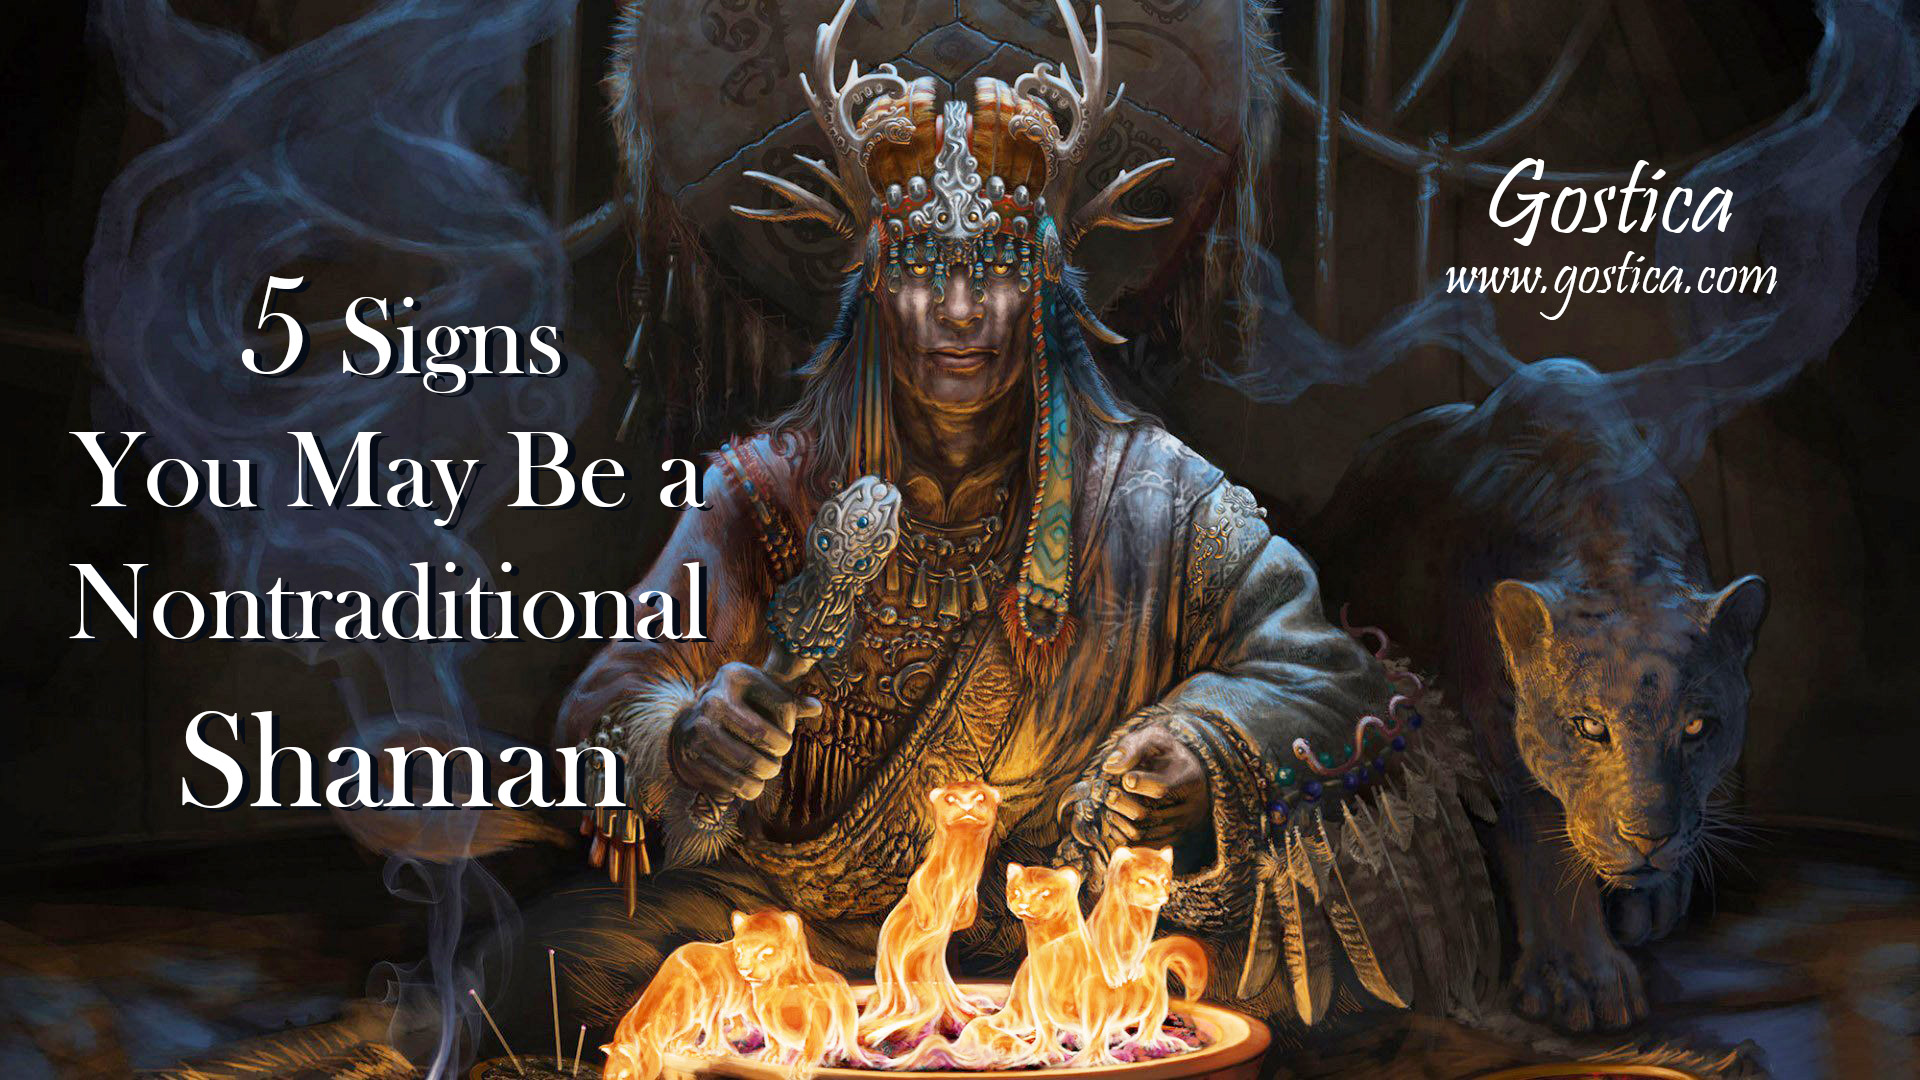 5-Signs-You-May-Be-a-Nontraditional-Shaman.jpg